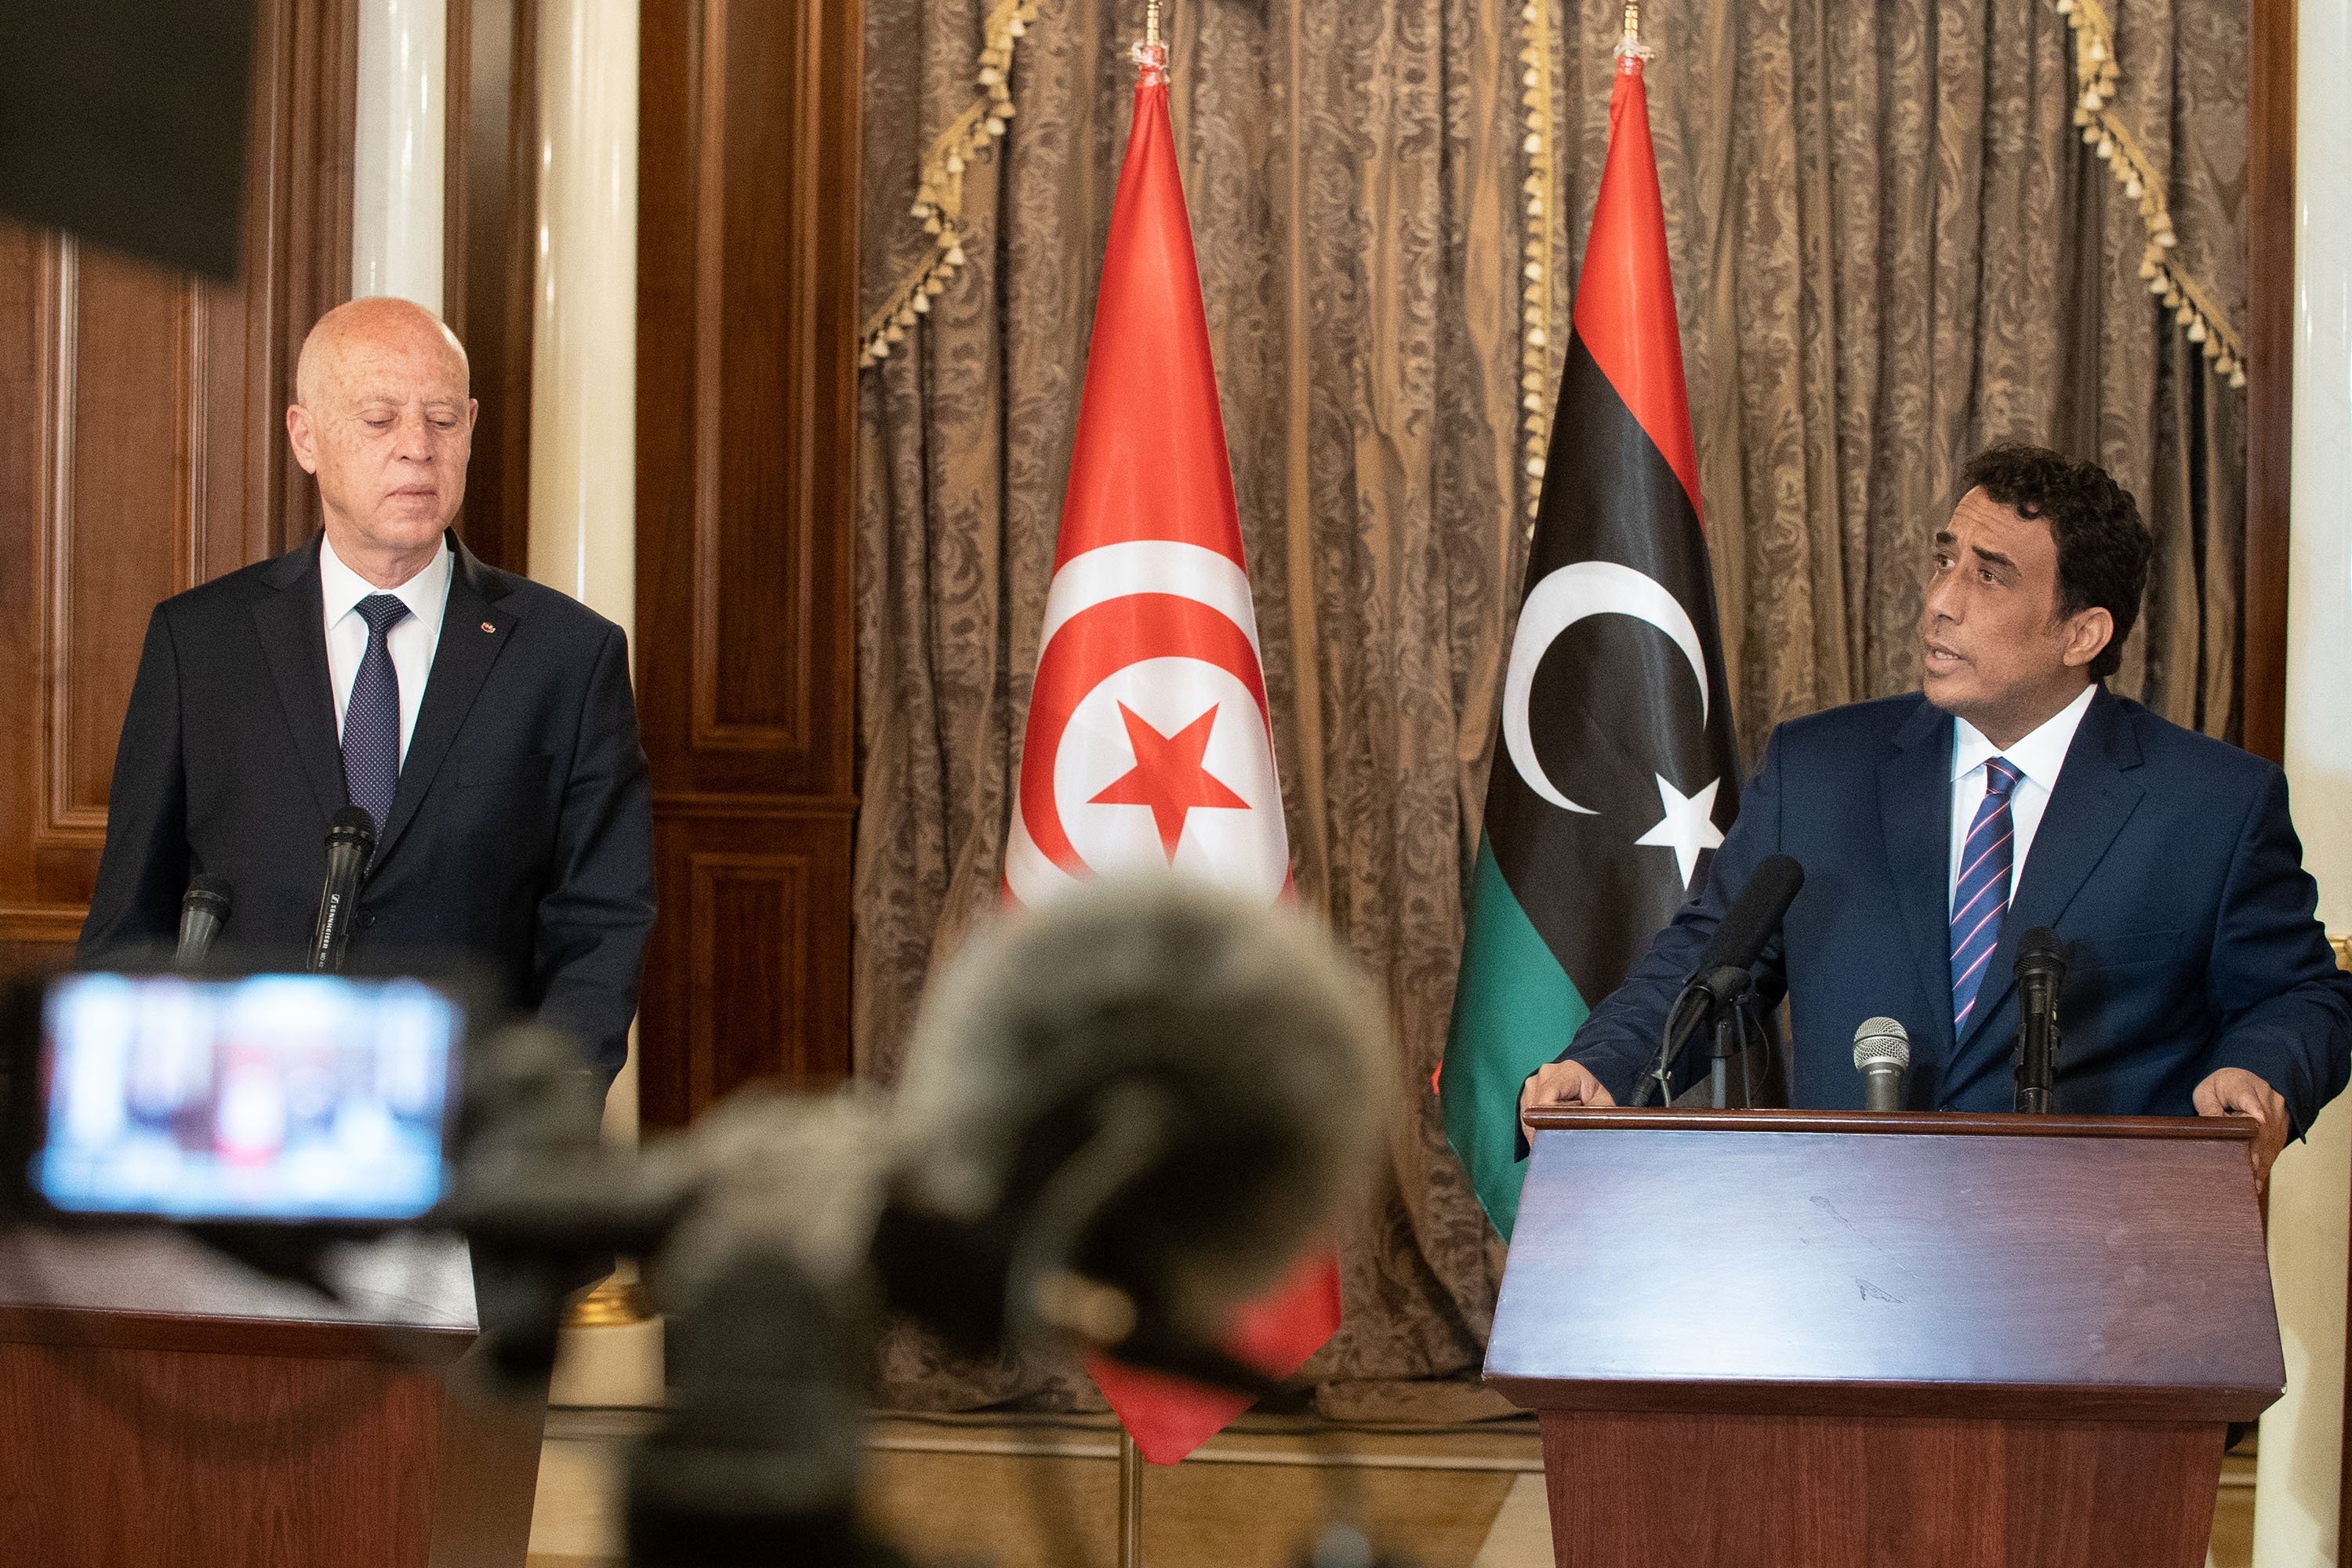 The press conference between the new Libyan Presidential Council head, Mohamed Menfi and the President of Tunisia Kais Saied, Tripoli, Libya, March 17, 2021. (Shutterstock Photo)